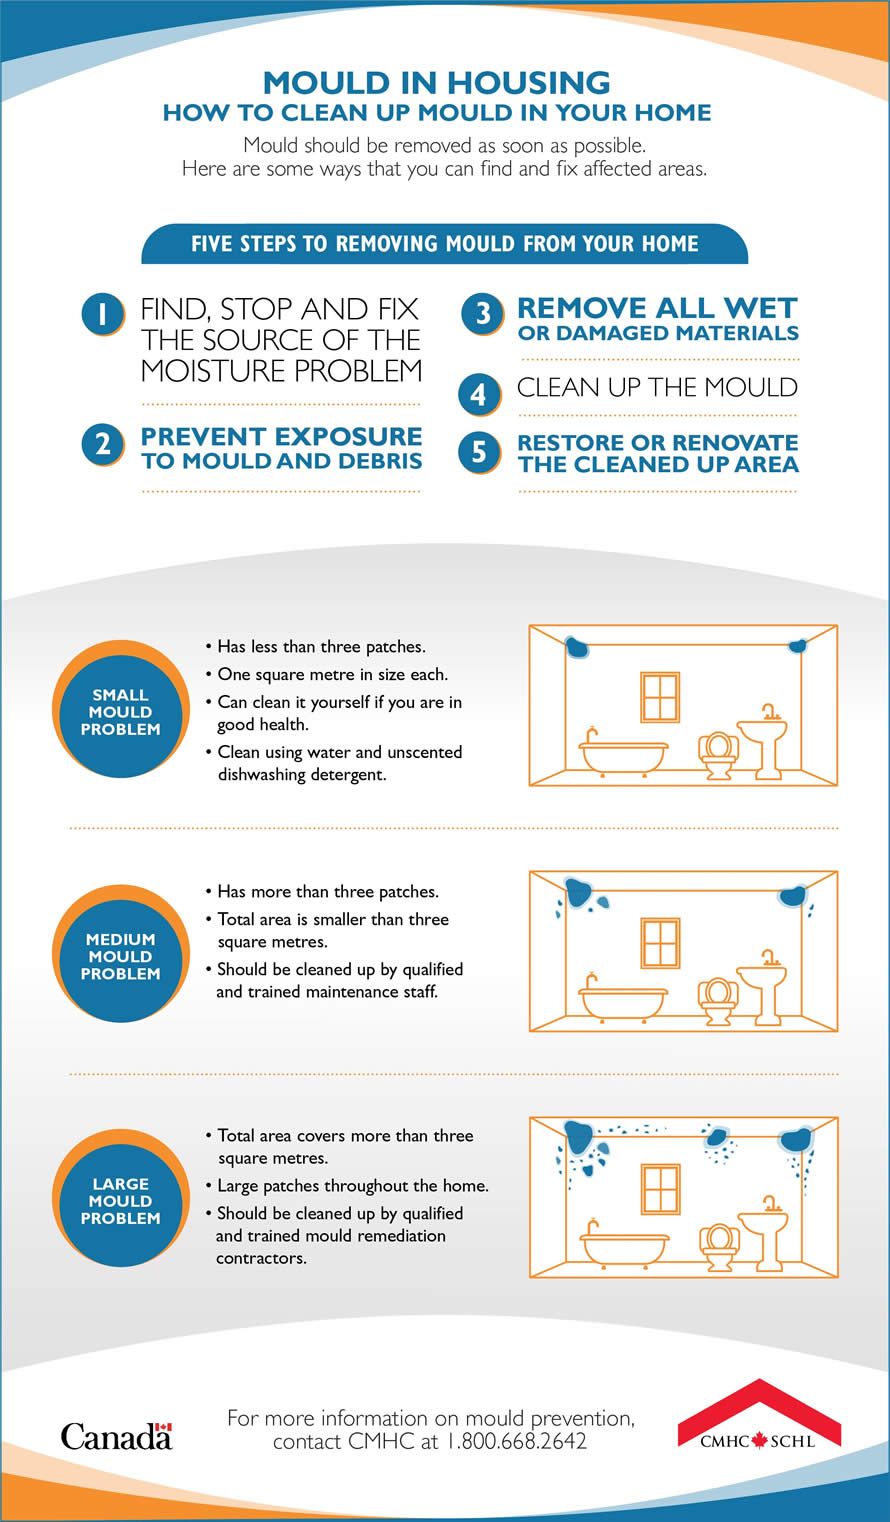  Mould cleanup at a glance: infographic